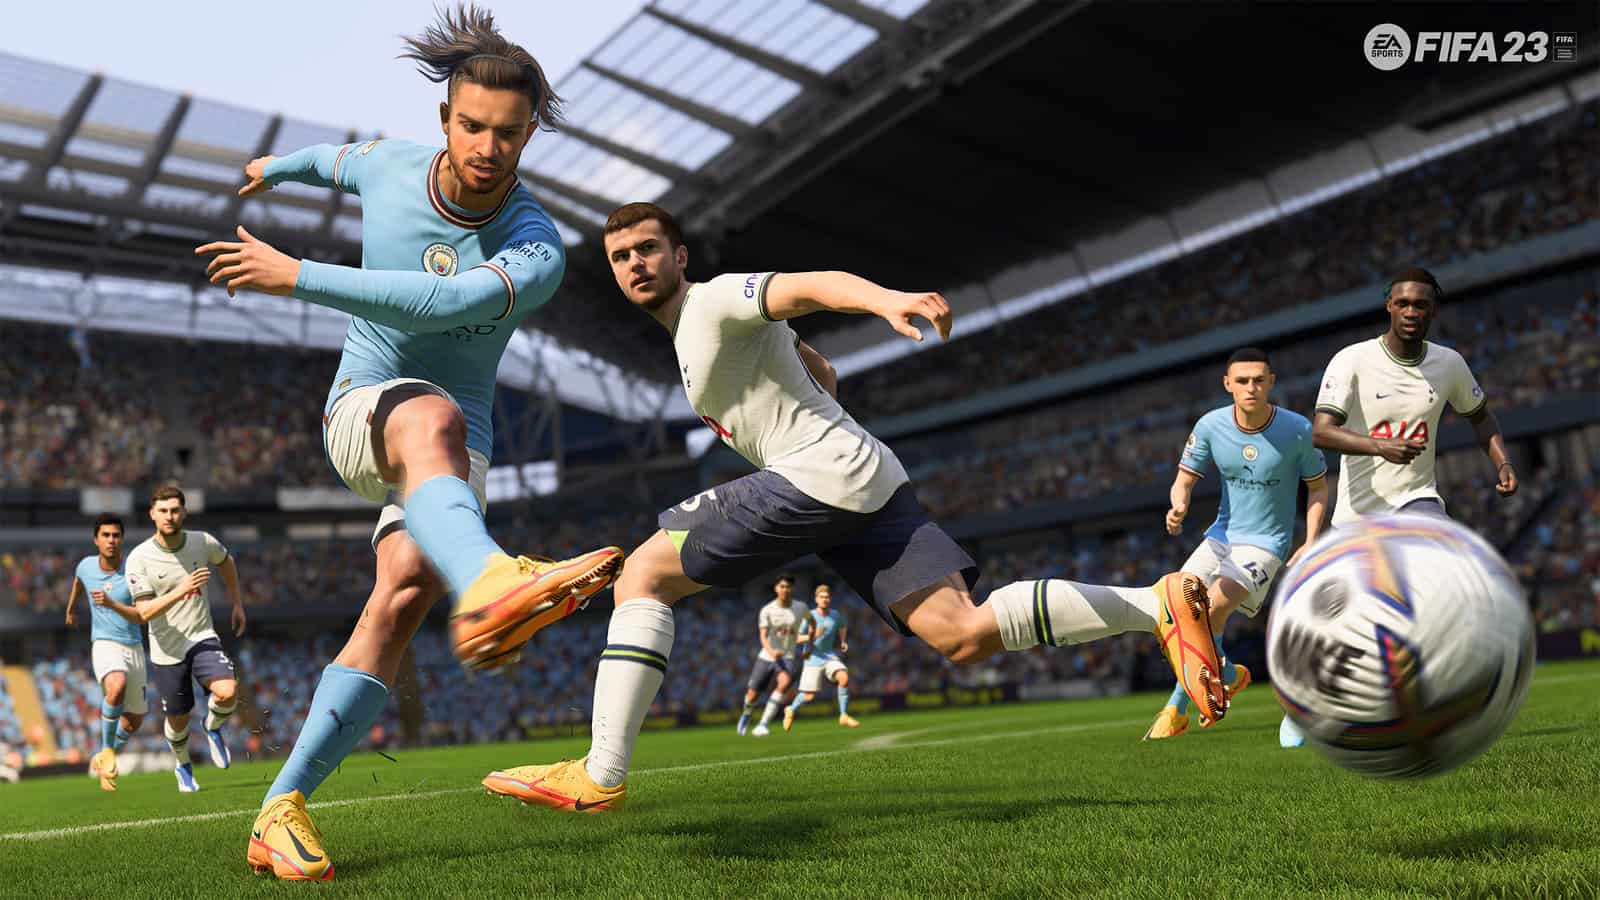 FIFA 23: extended gameplay trailer